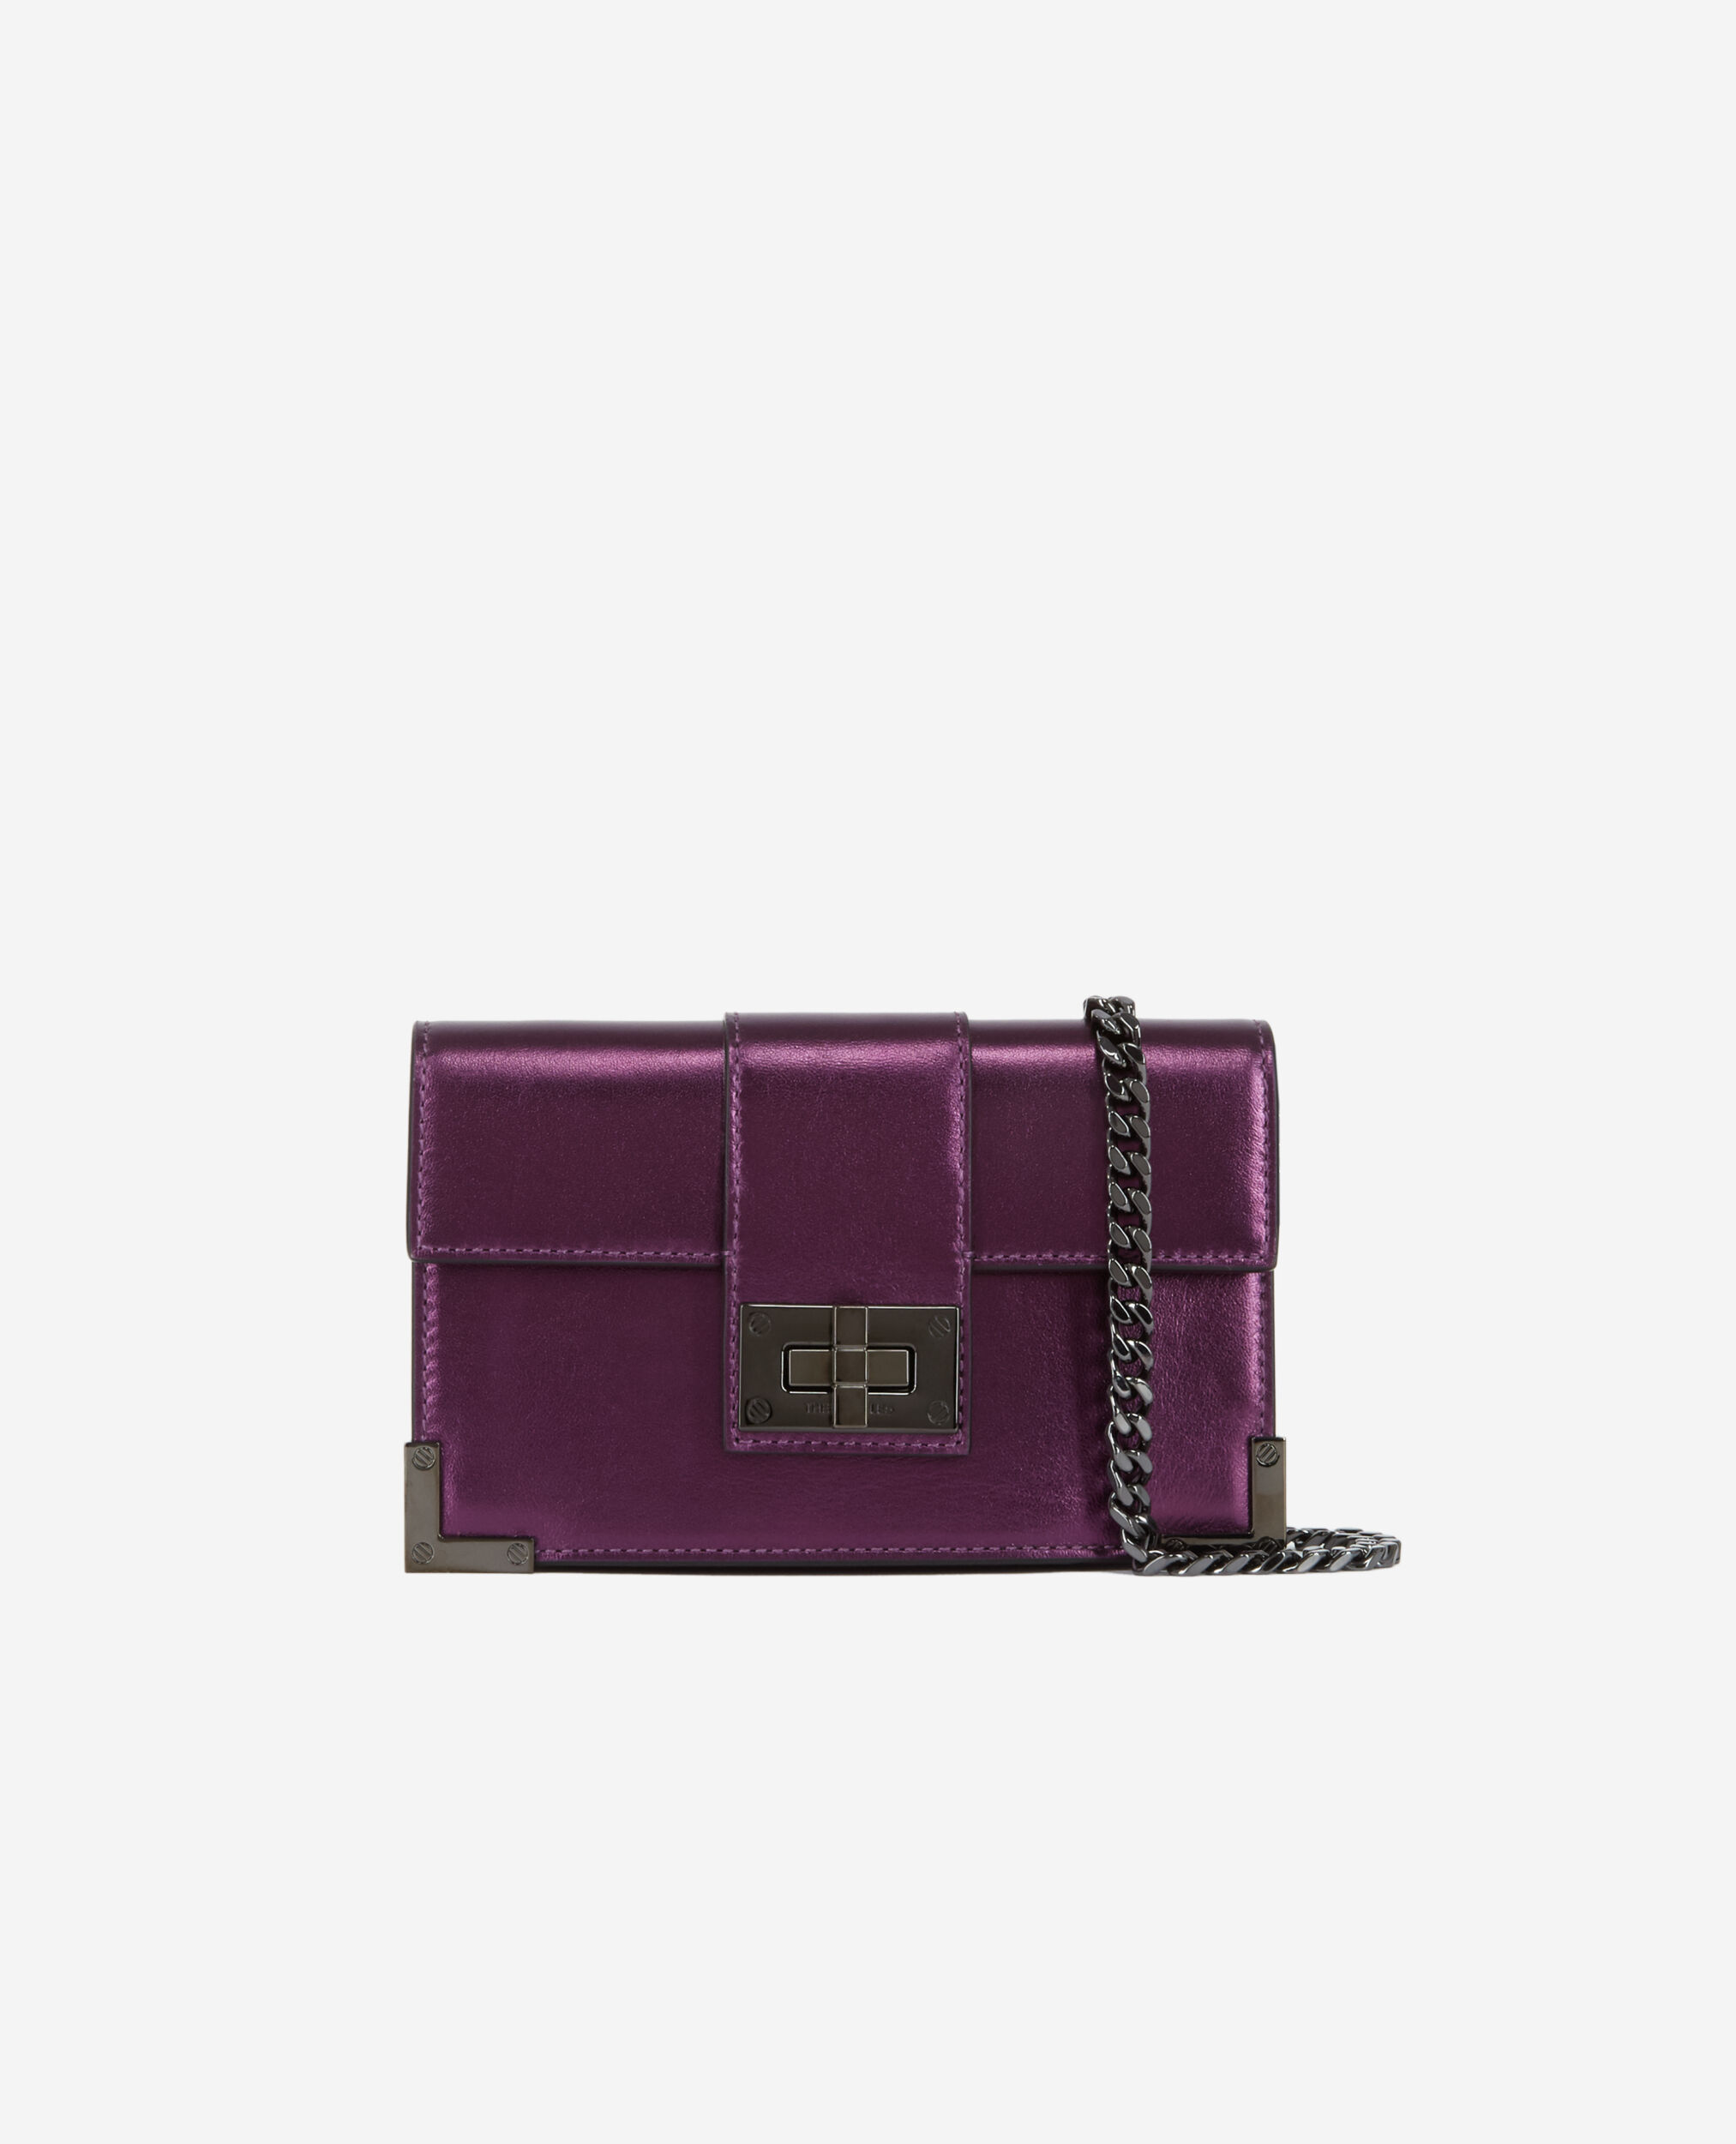 Small Emily clutch bag in purple leather, PURPLE, hi-res image number null